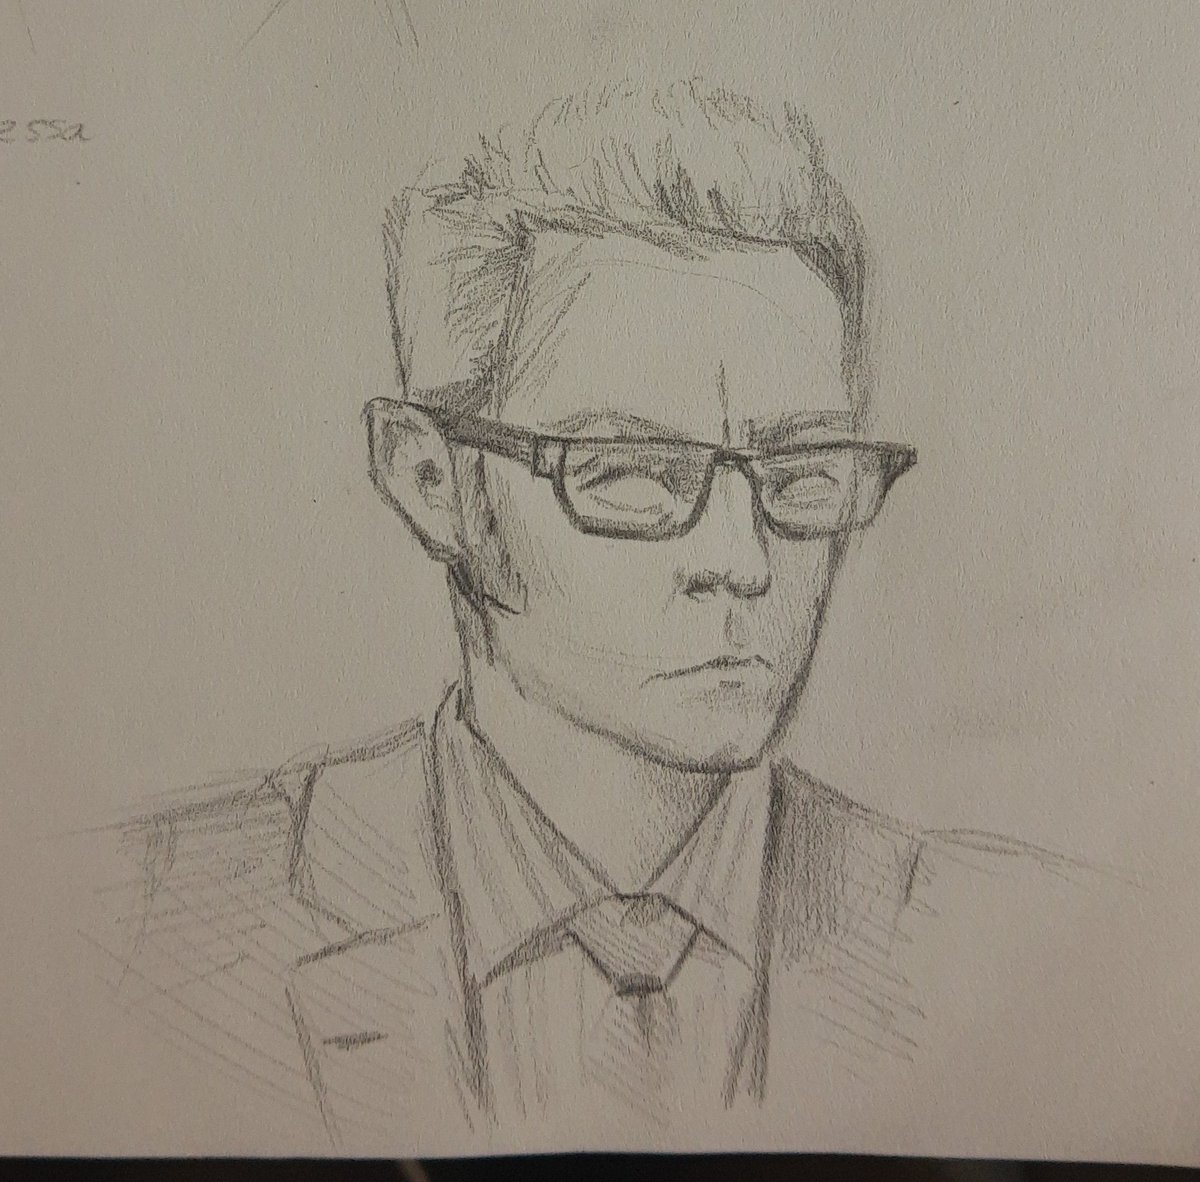 Got a new sketchbook so perfect opportunity for some person of interest sketches :D

#PersonOfInterest #POI #personofinterestfanart #poifanart 